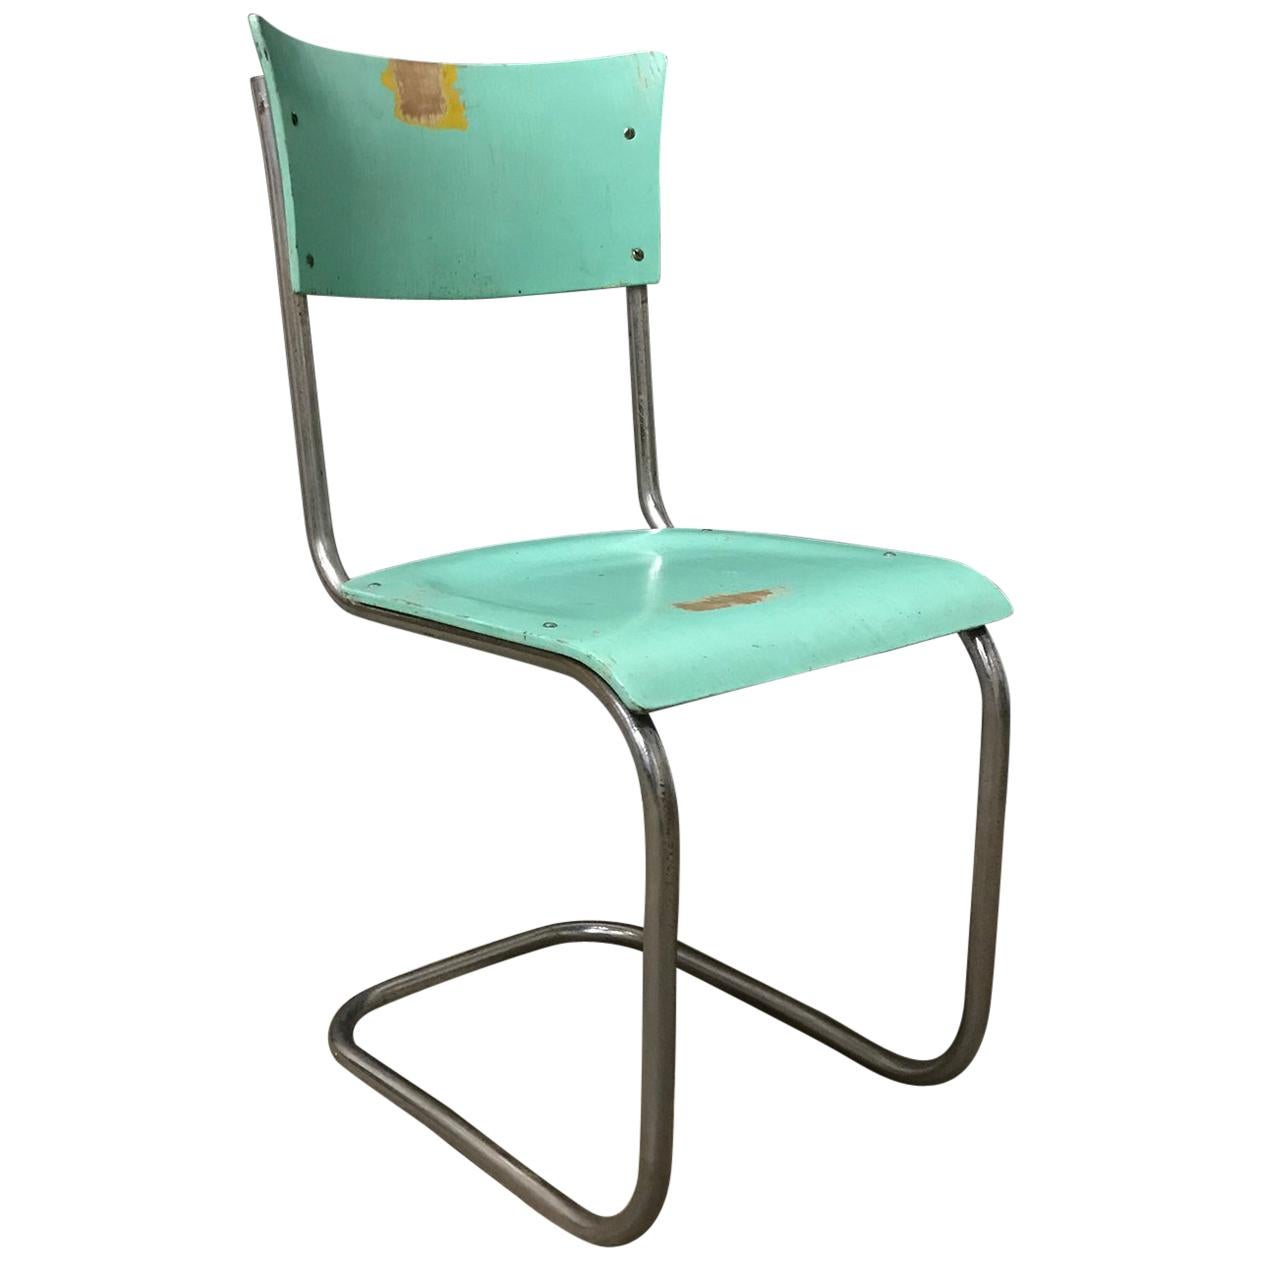 1931, Mart Stam for Thonet, Turquoise Wooden S43